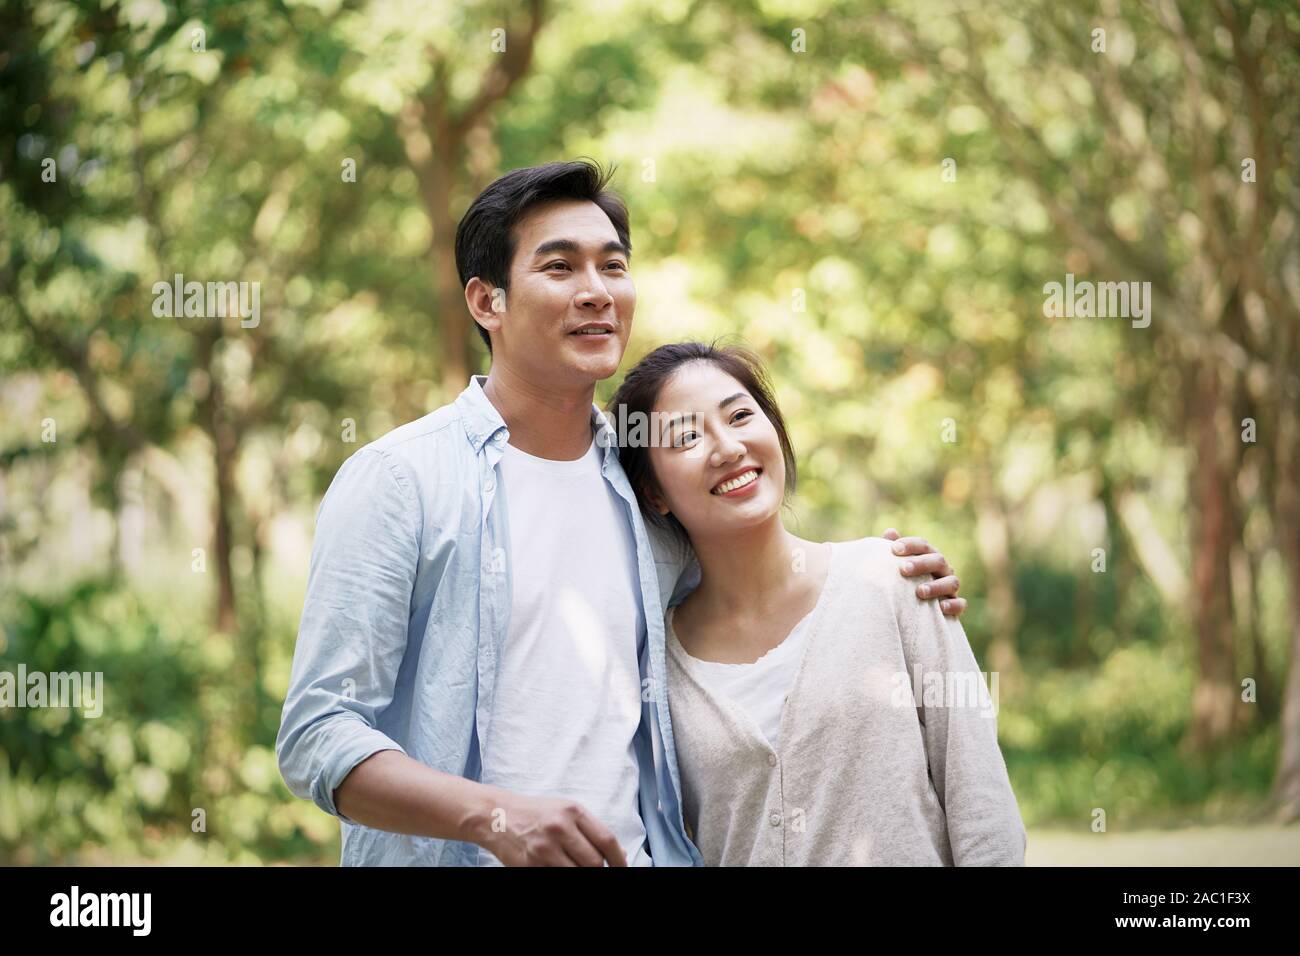 happy loving young asian couple relaxing in park Stock Photo